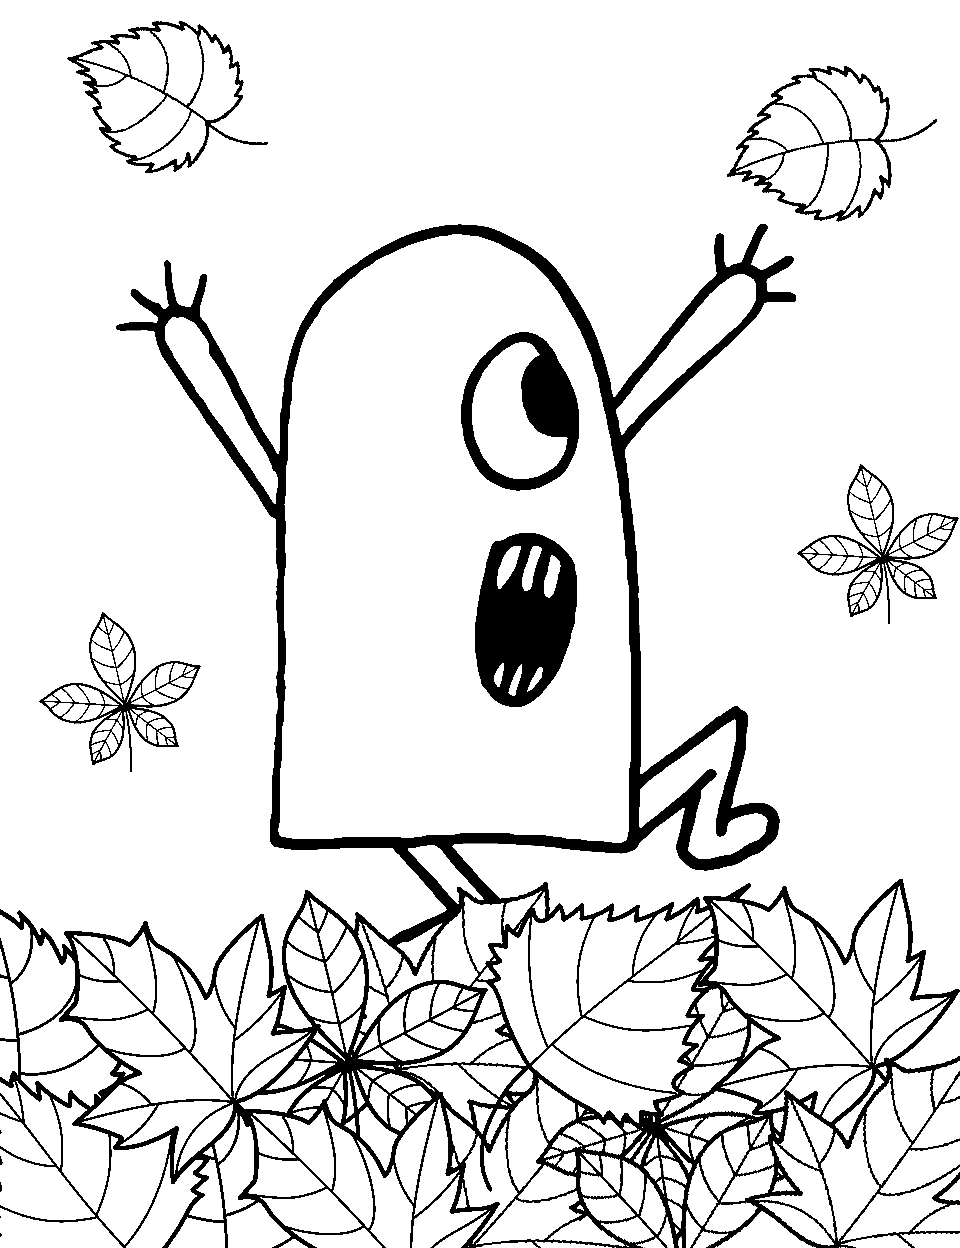 Monster Playing in Autumn Leaves Coloring Page - A joyful monster playing and jumping in a pile of fall leaves.